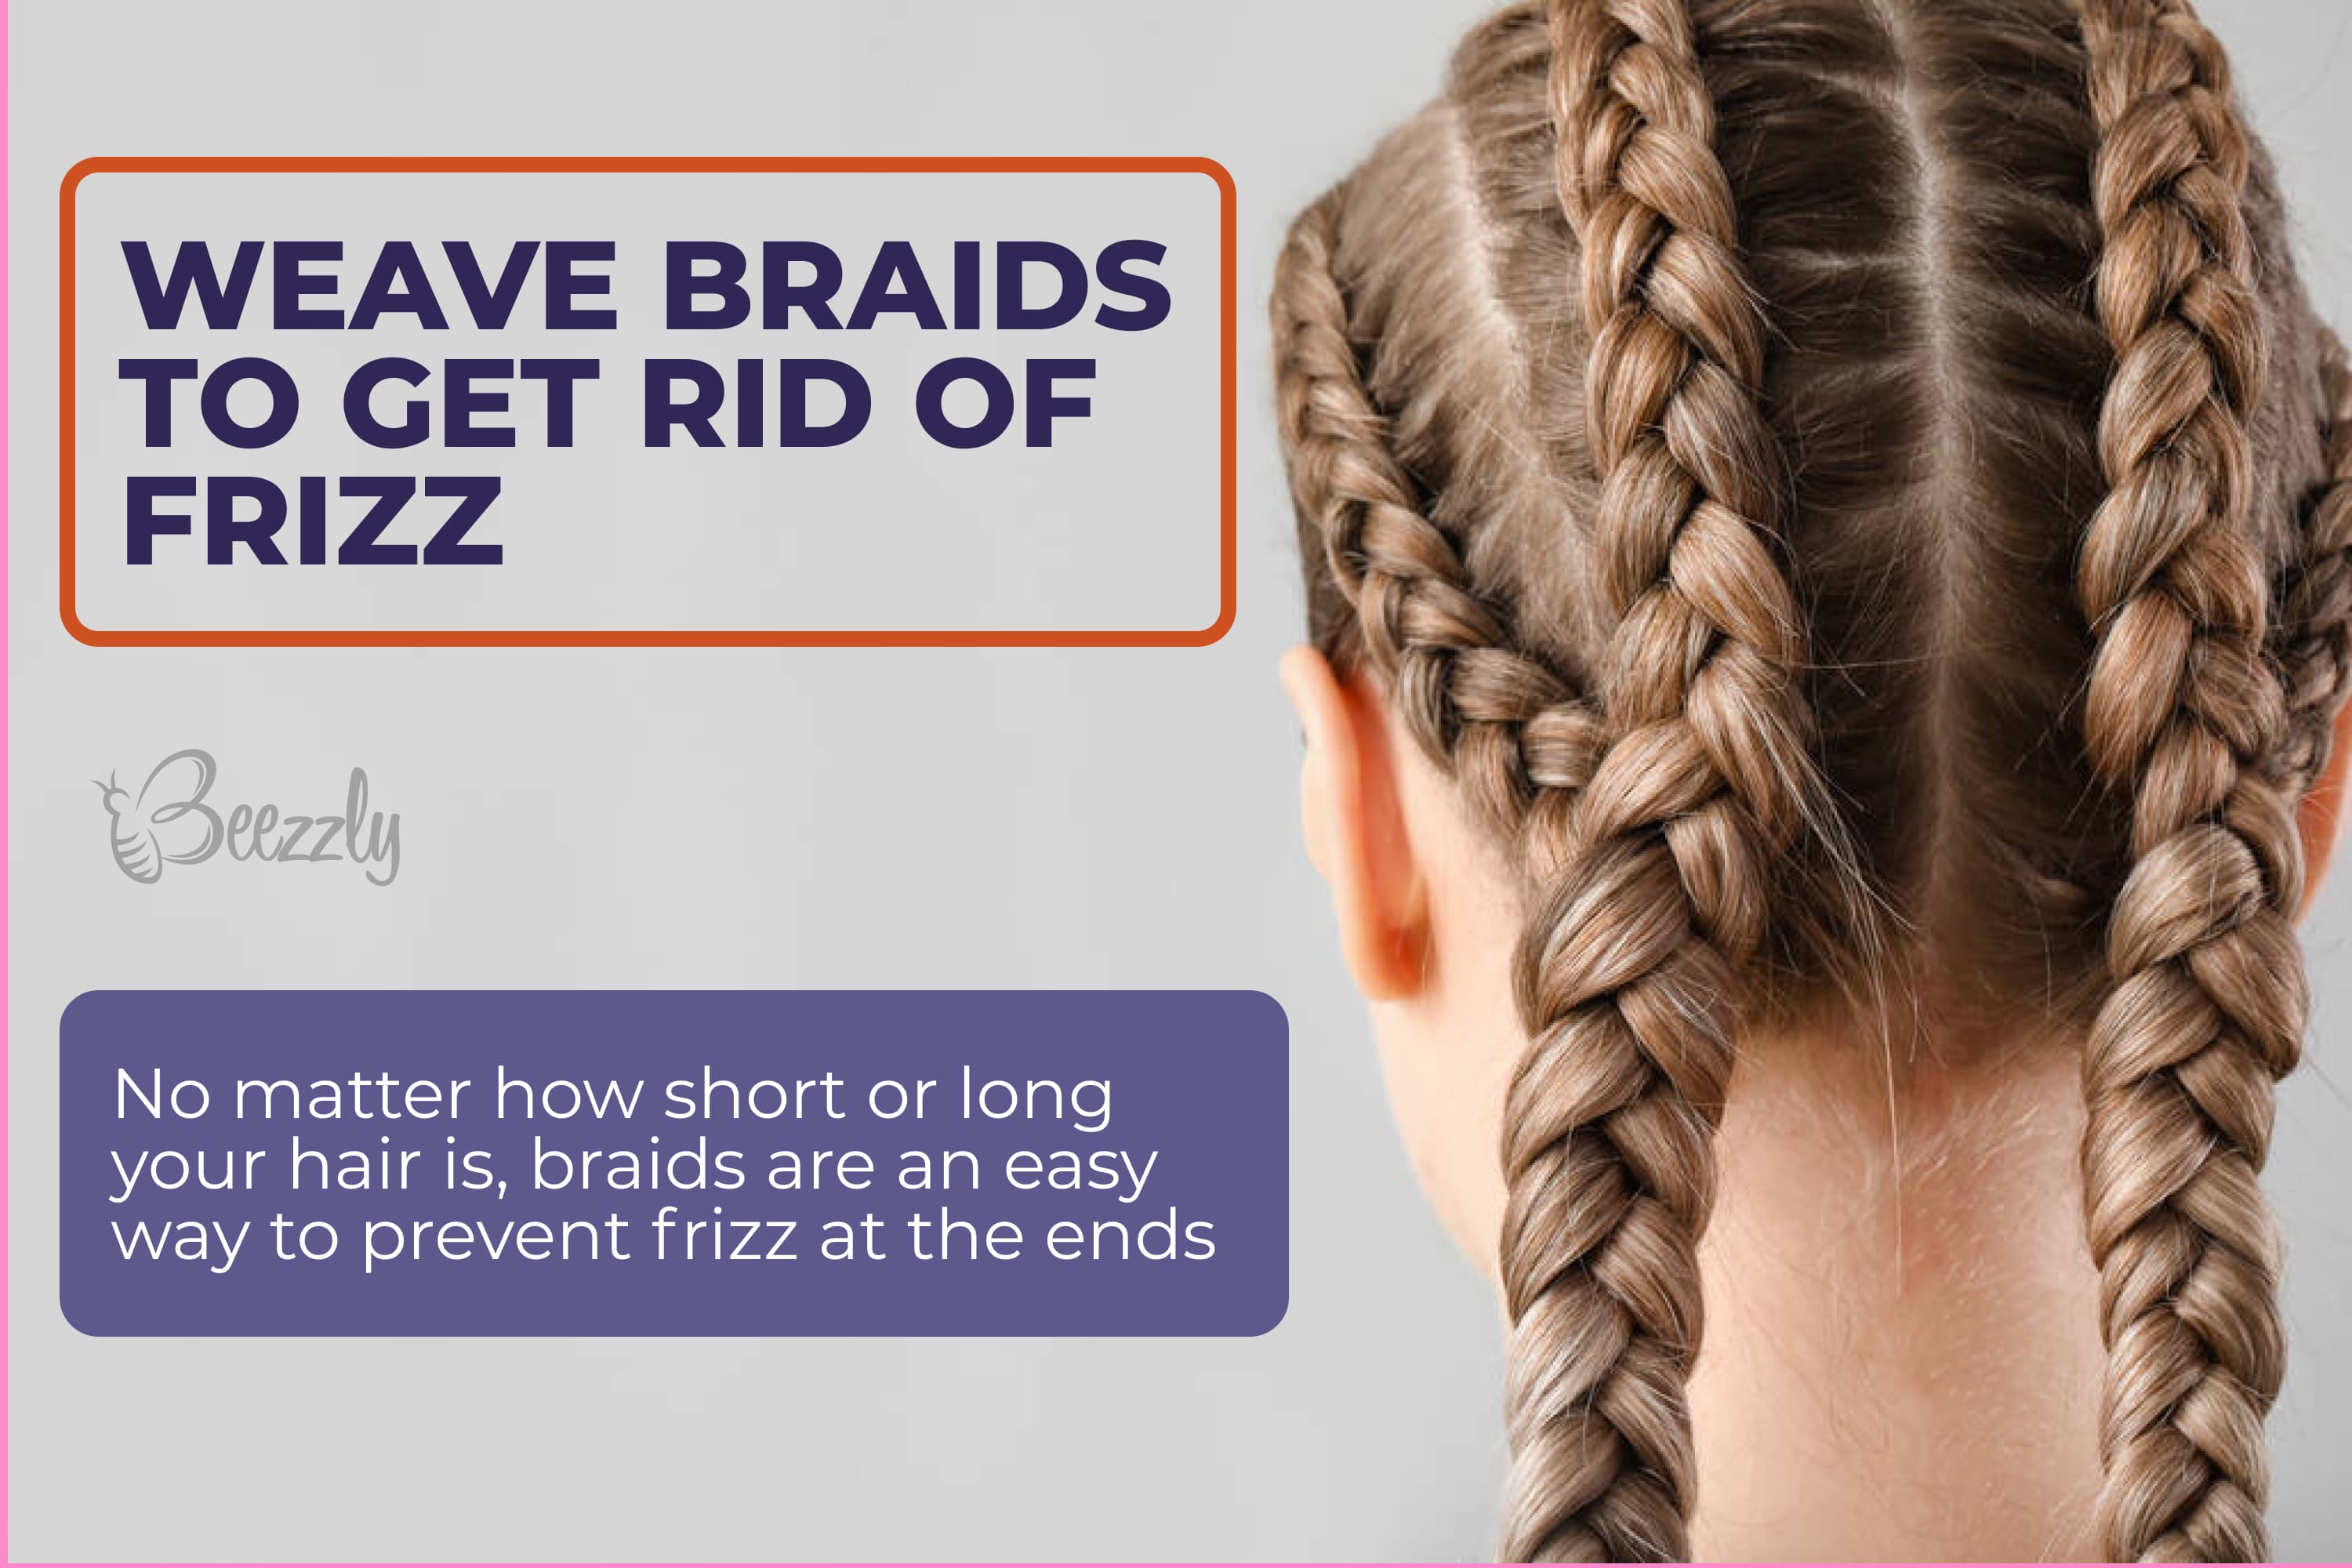 Weave braids to get rid of frizz